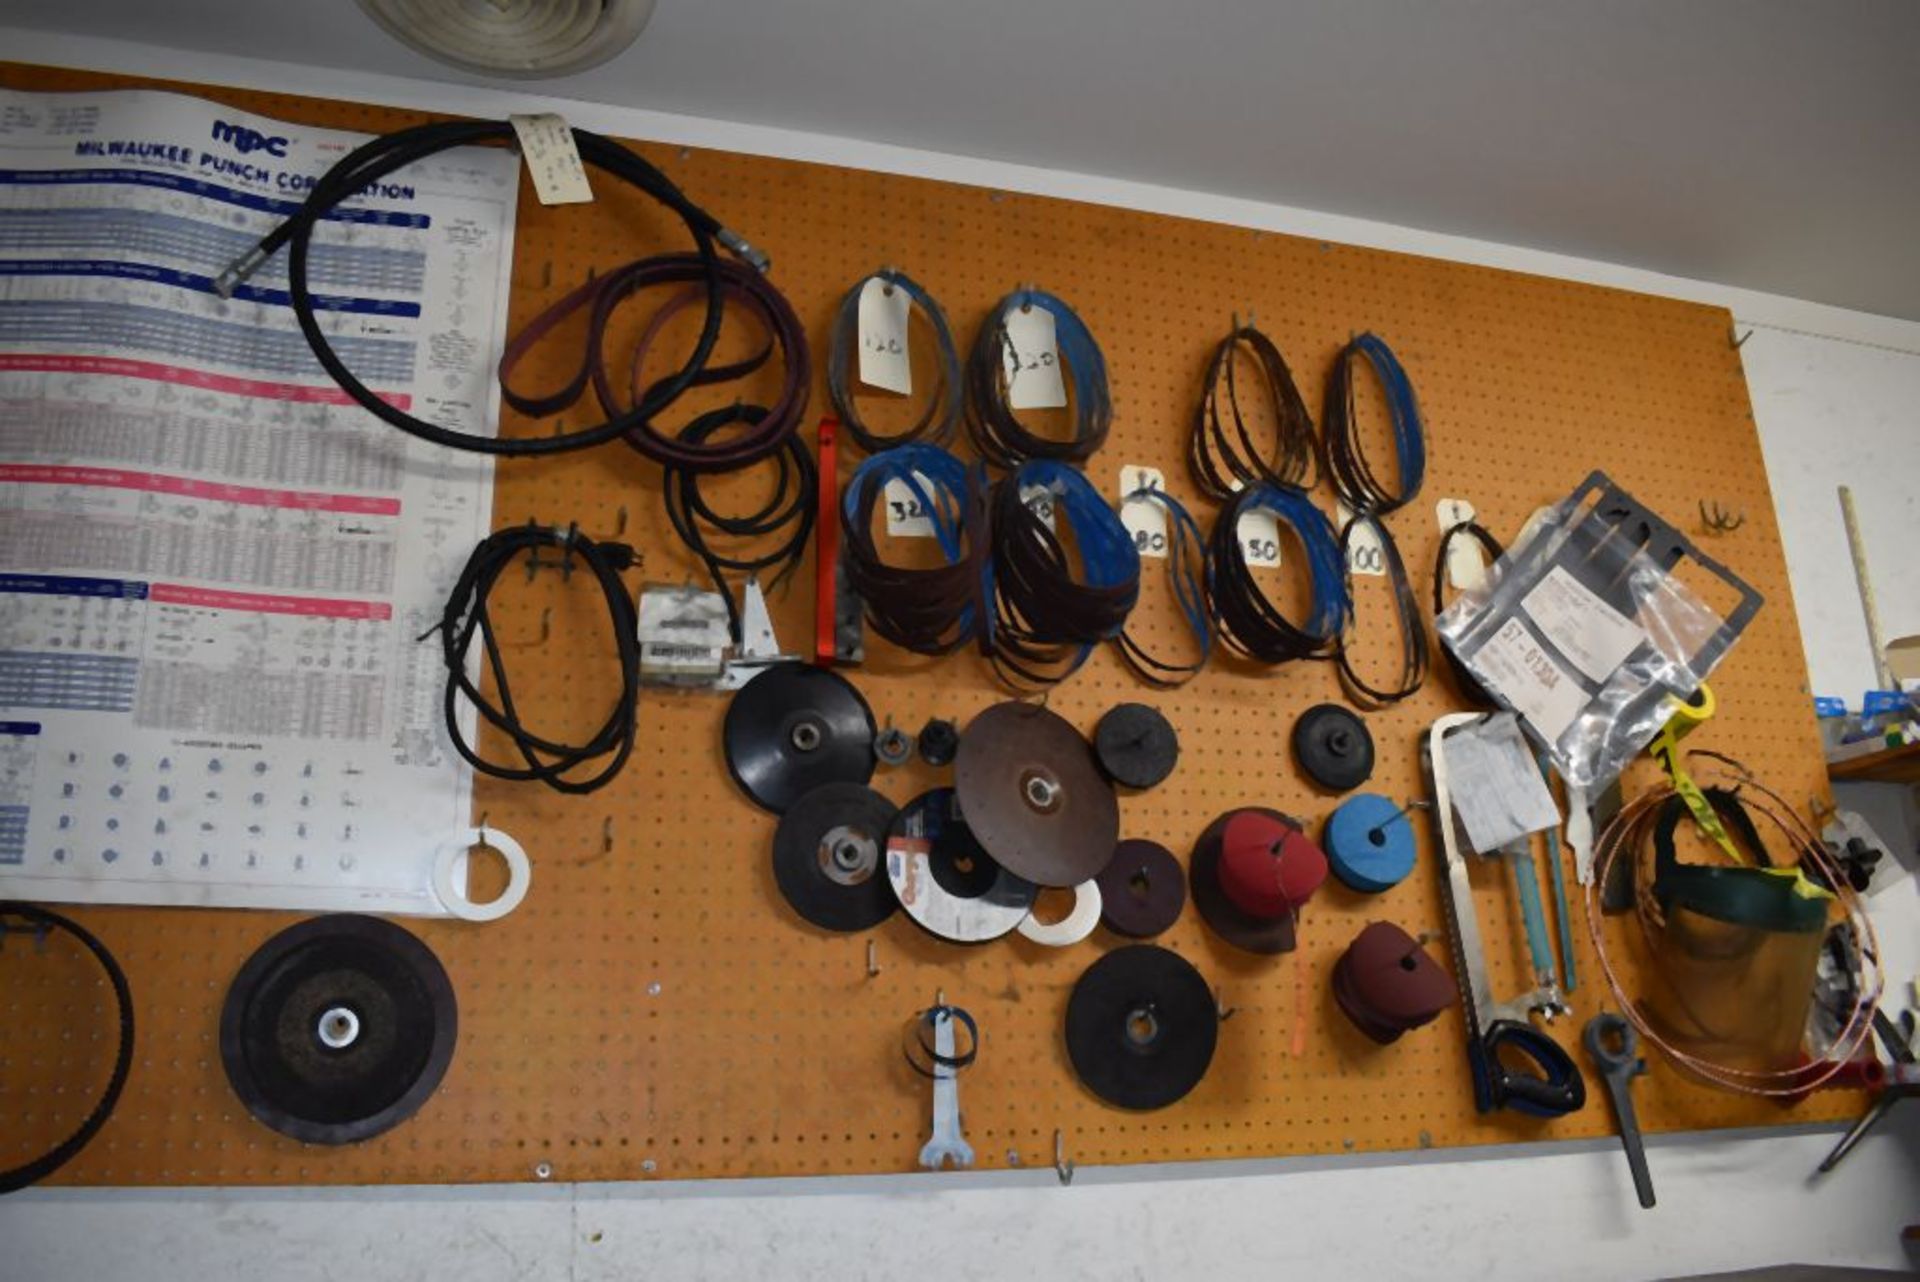 CONTENTS ON PEGBOARD; AIRFILE BELTS, SAWS, MISC. ABRASIVES, ETC.